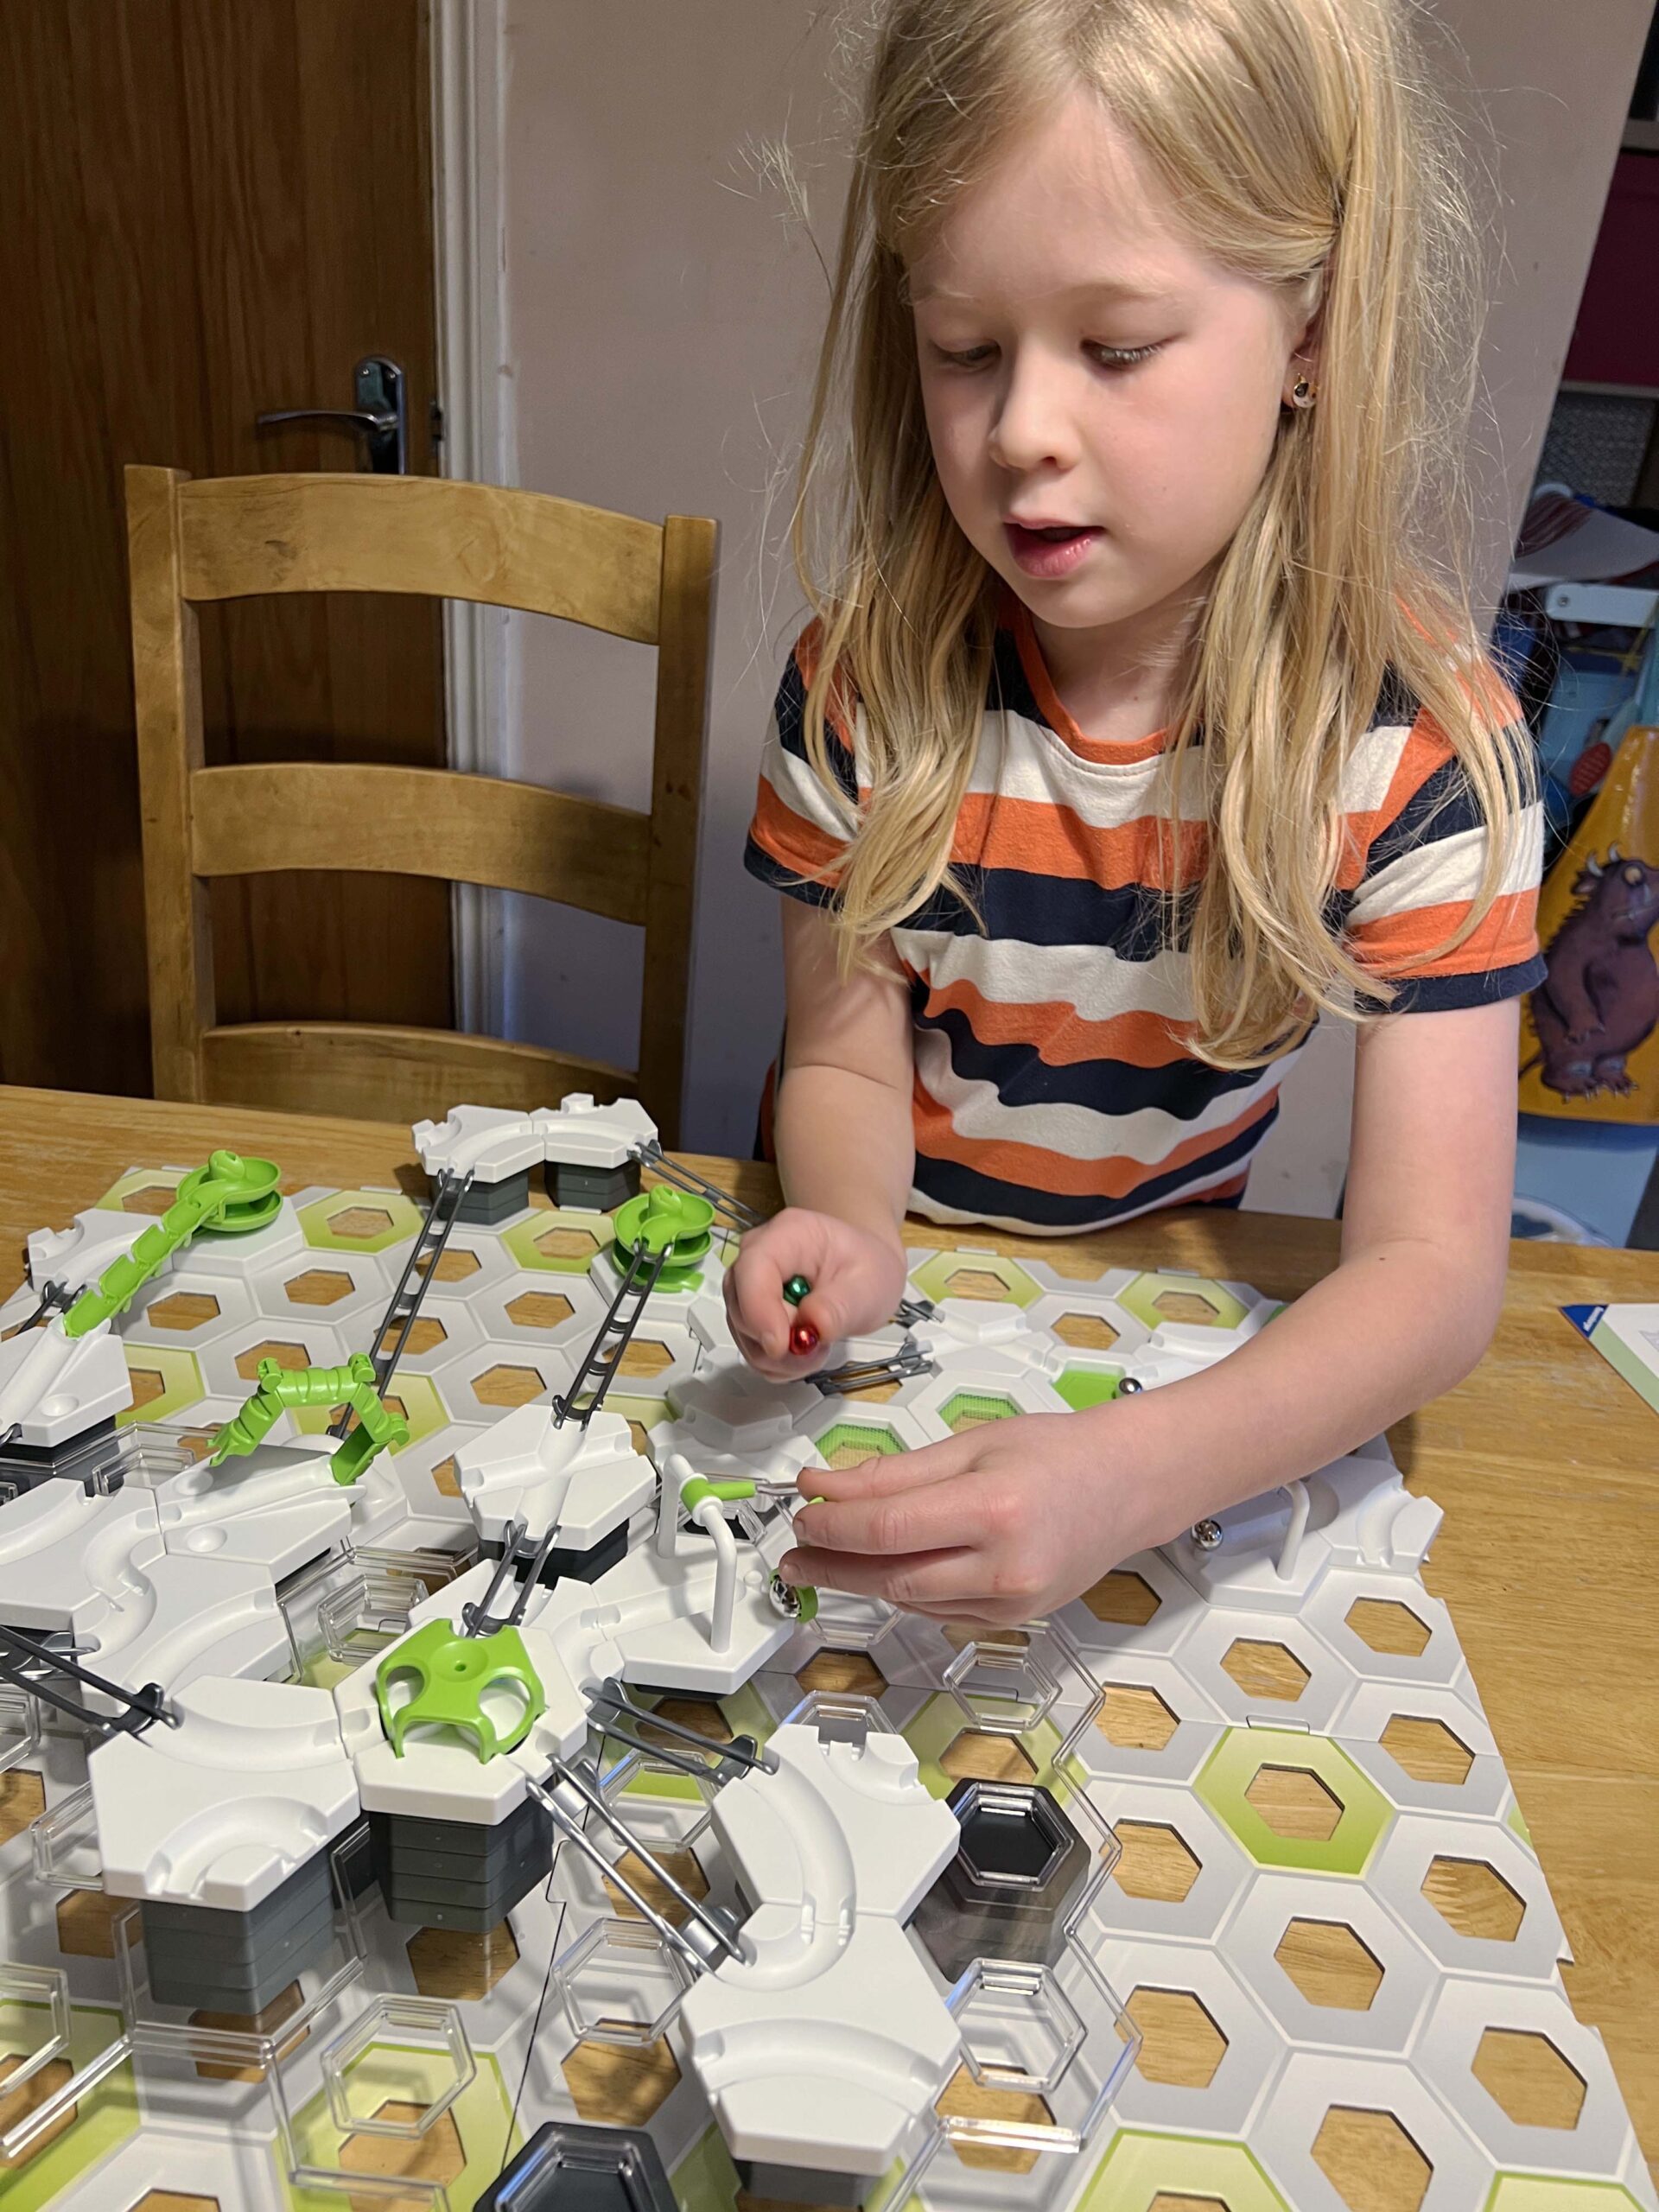 Gravitrax Obstacle Course Review - A Toy Great for STEM Skills